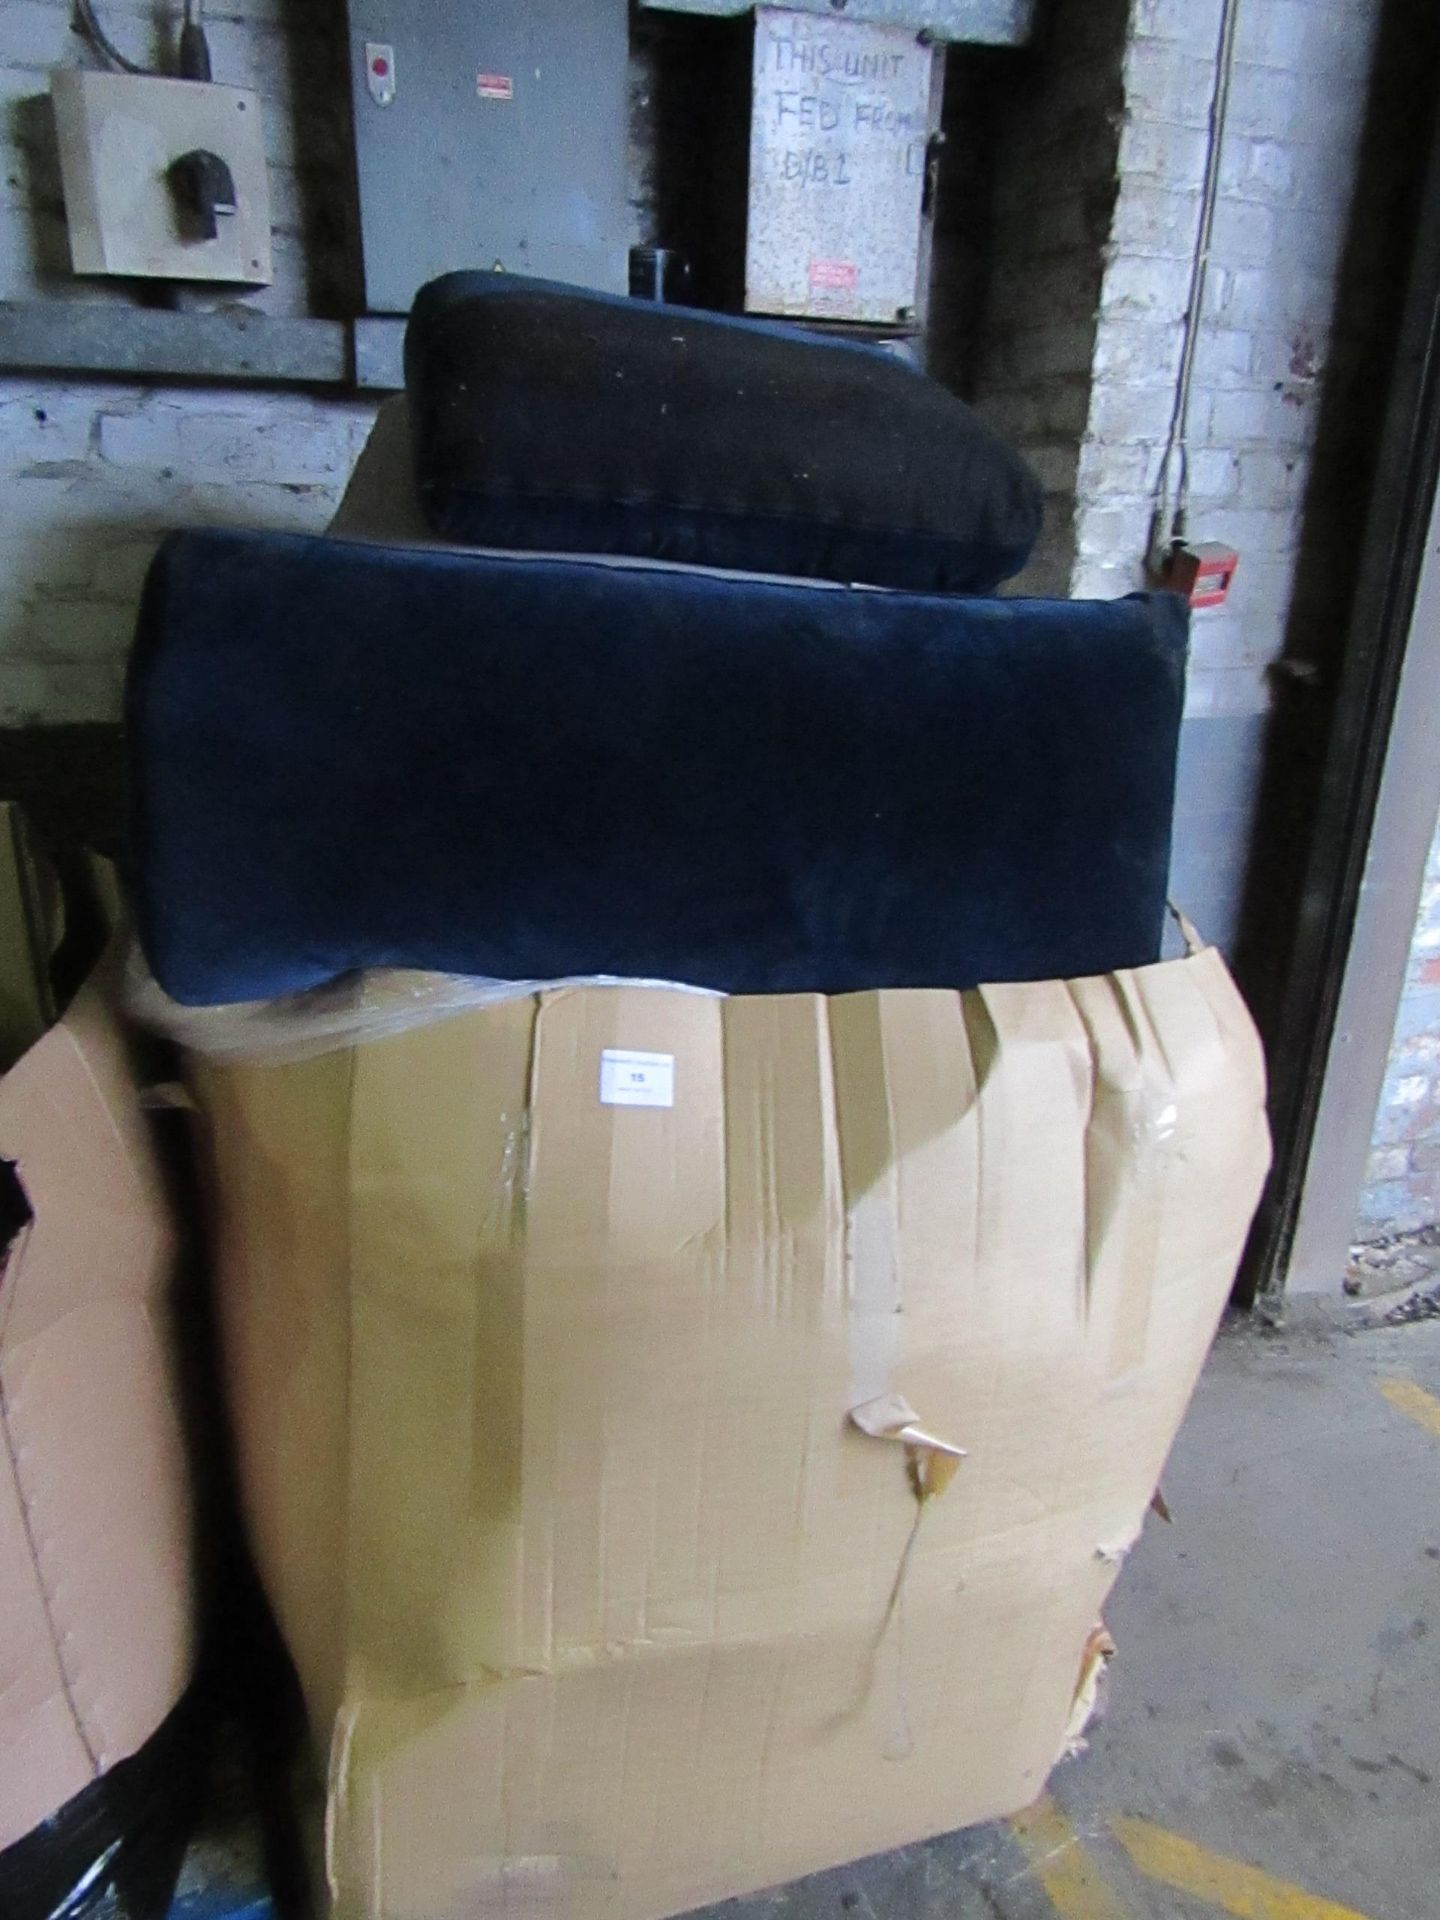 | 1X | PALLET OF SWOON B.E.R SOFA CUSHIONS, UNMANIFESTED, WE HAVE NO IDEA WHAT IS ON THIS PALLET